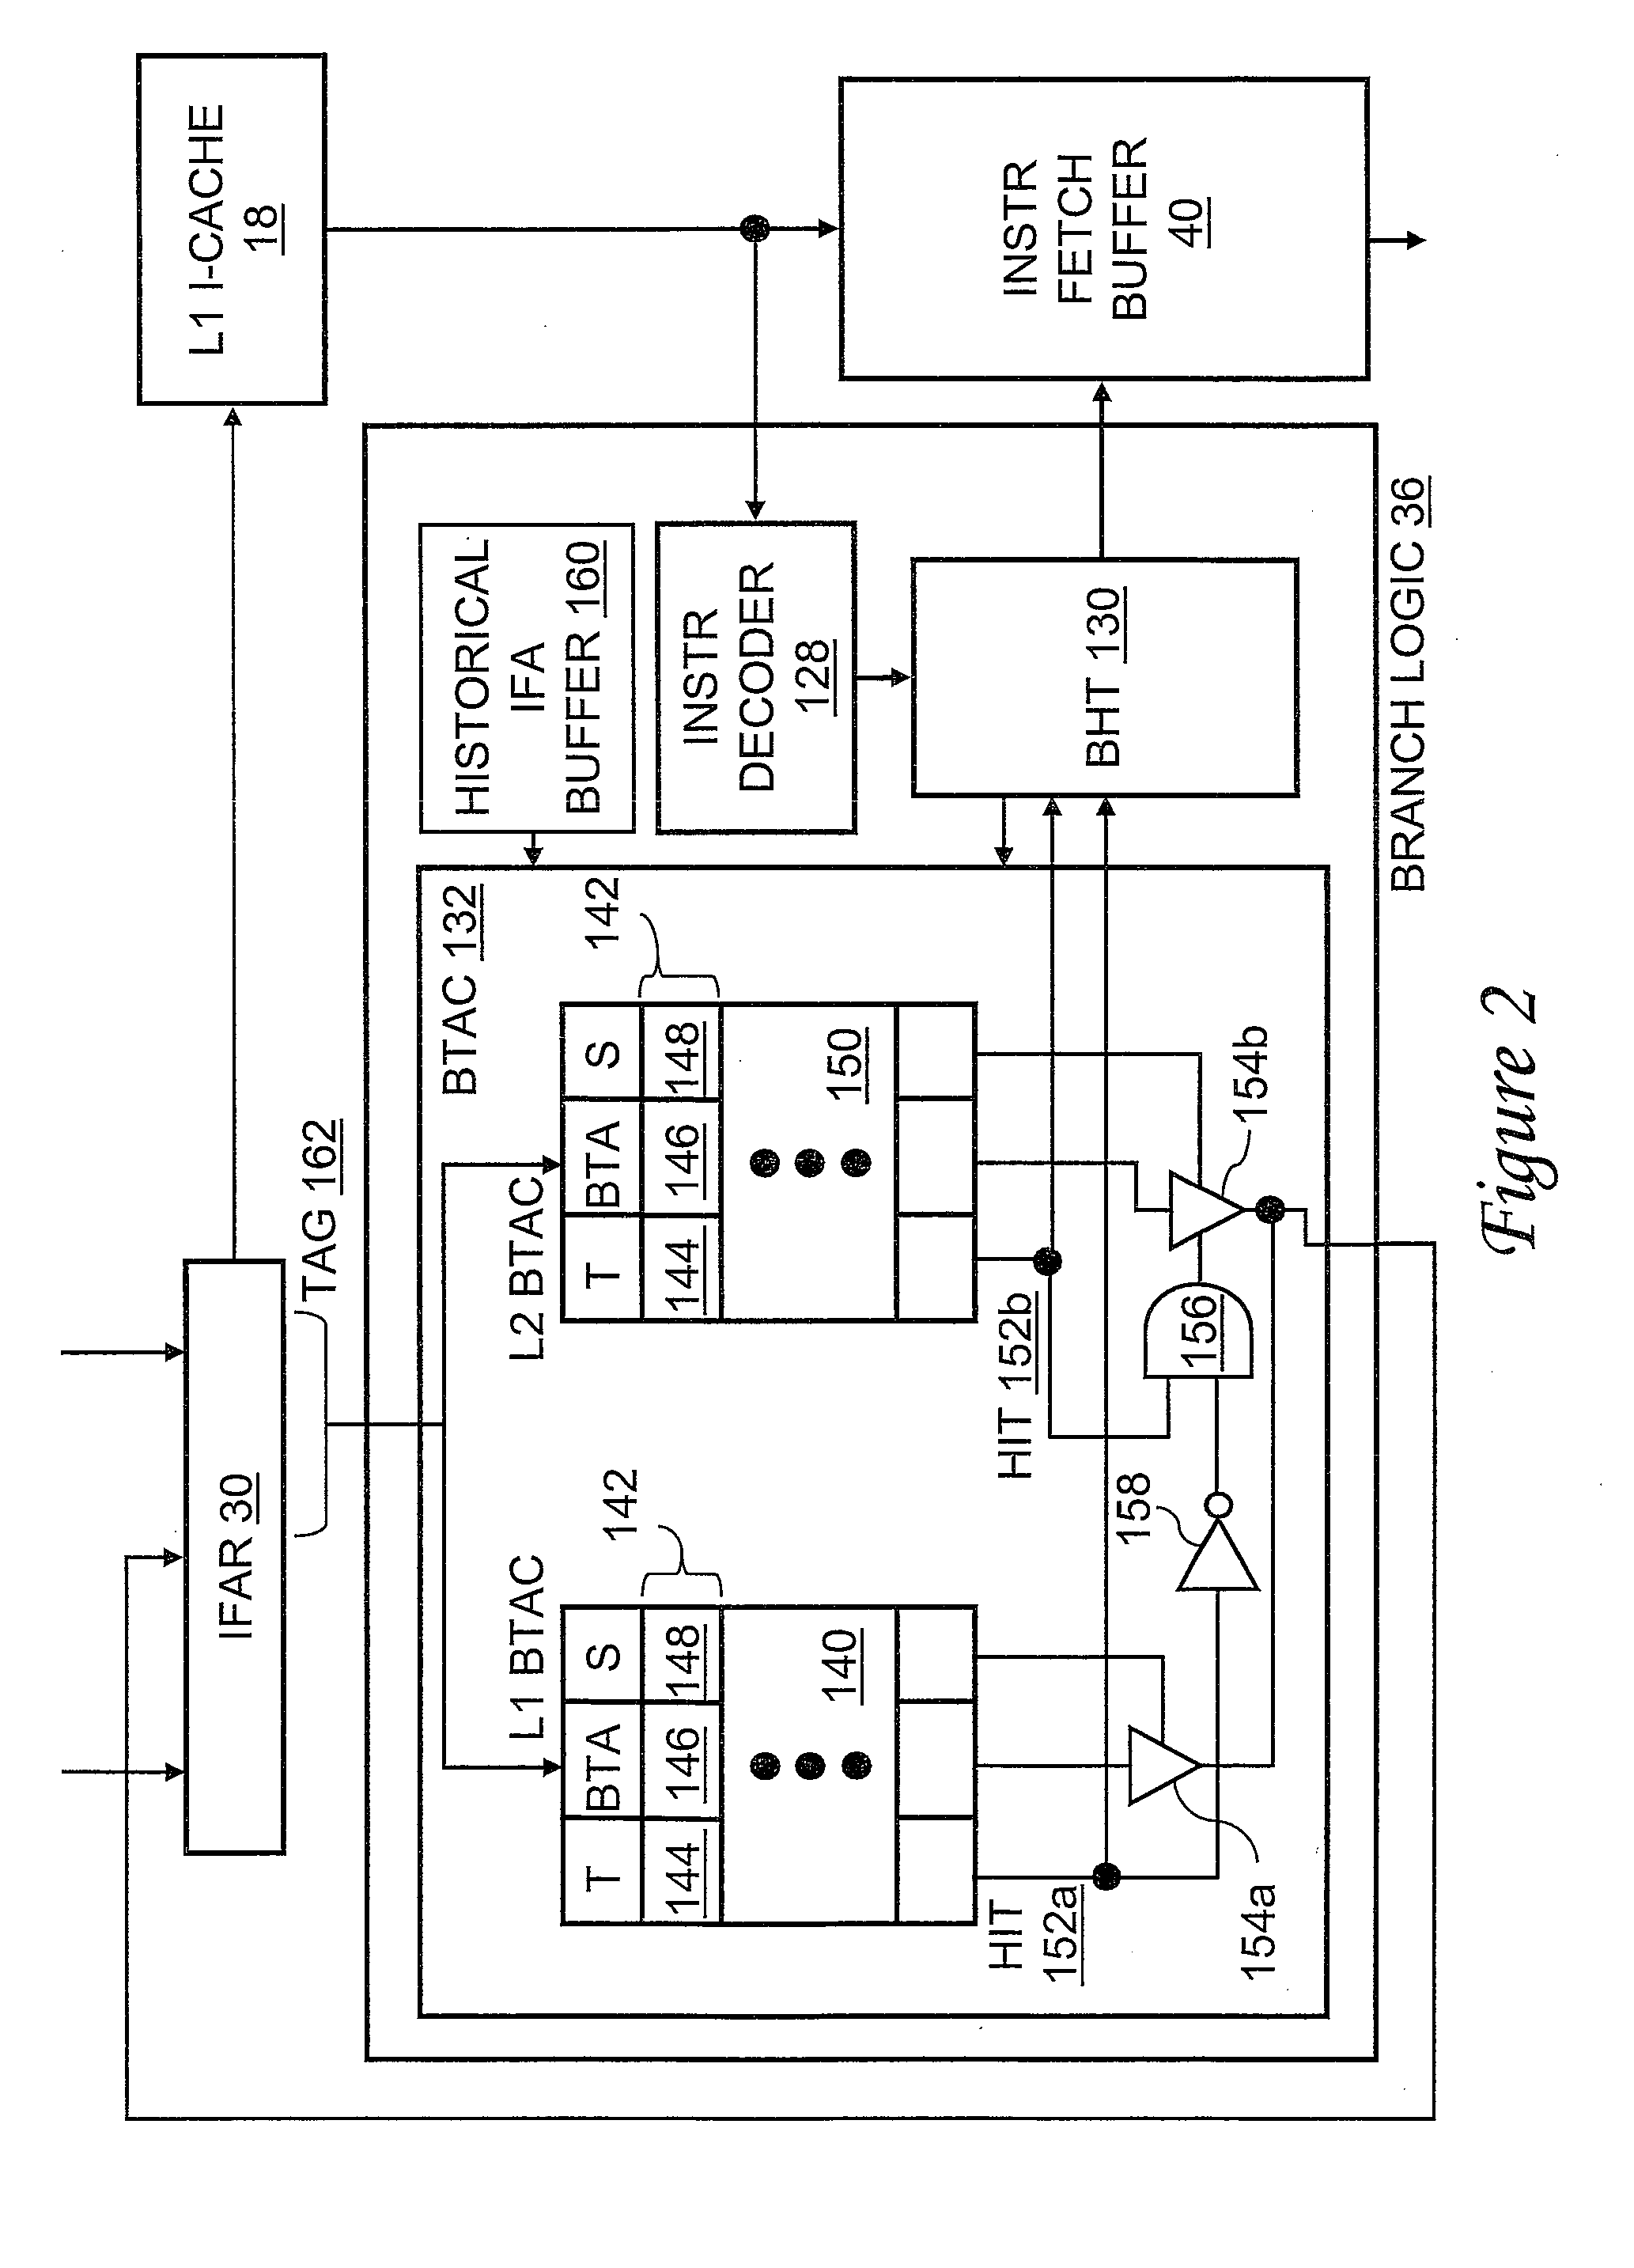 Data processing system, processor and method of data processing having improved branch target address cache